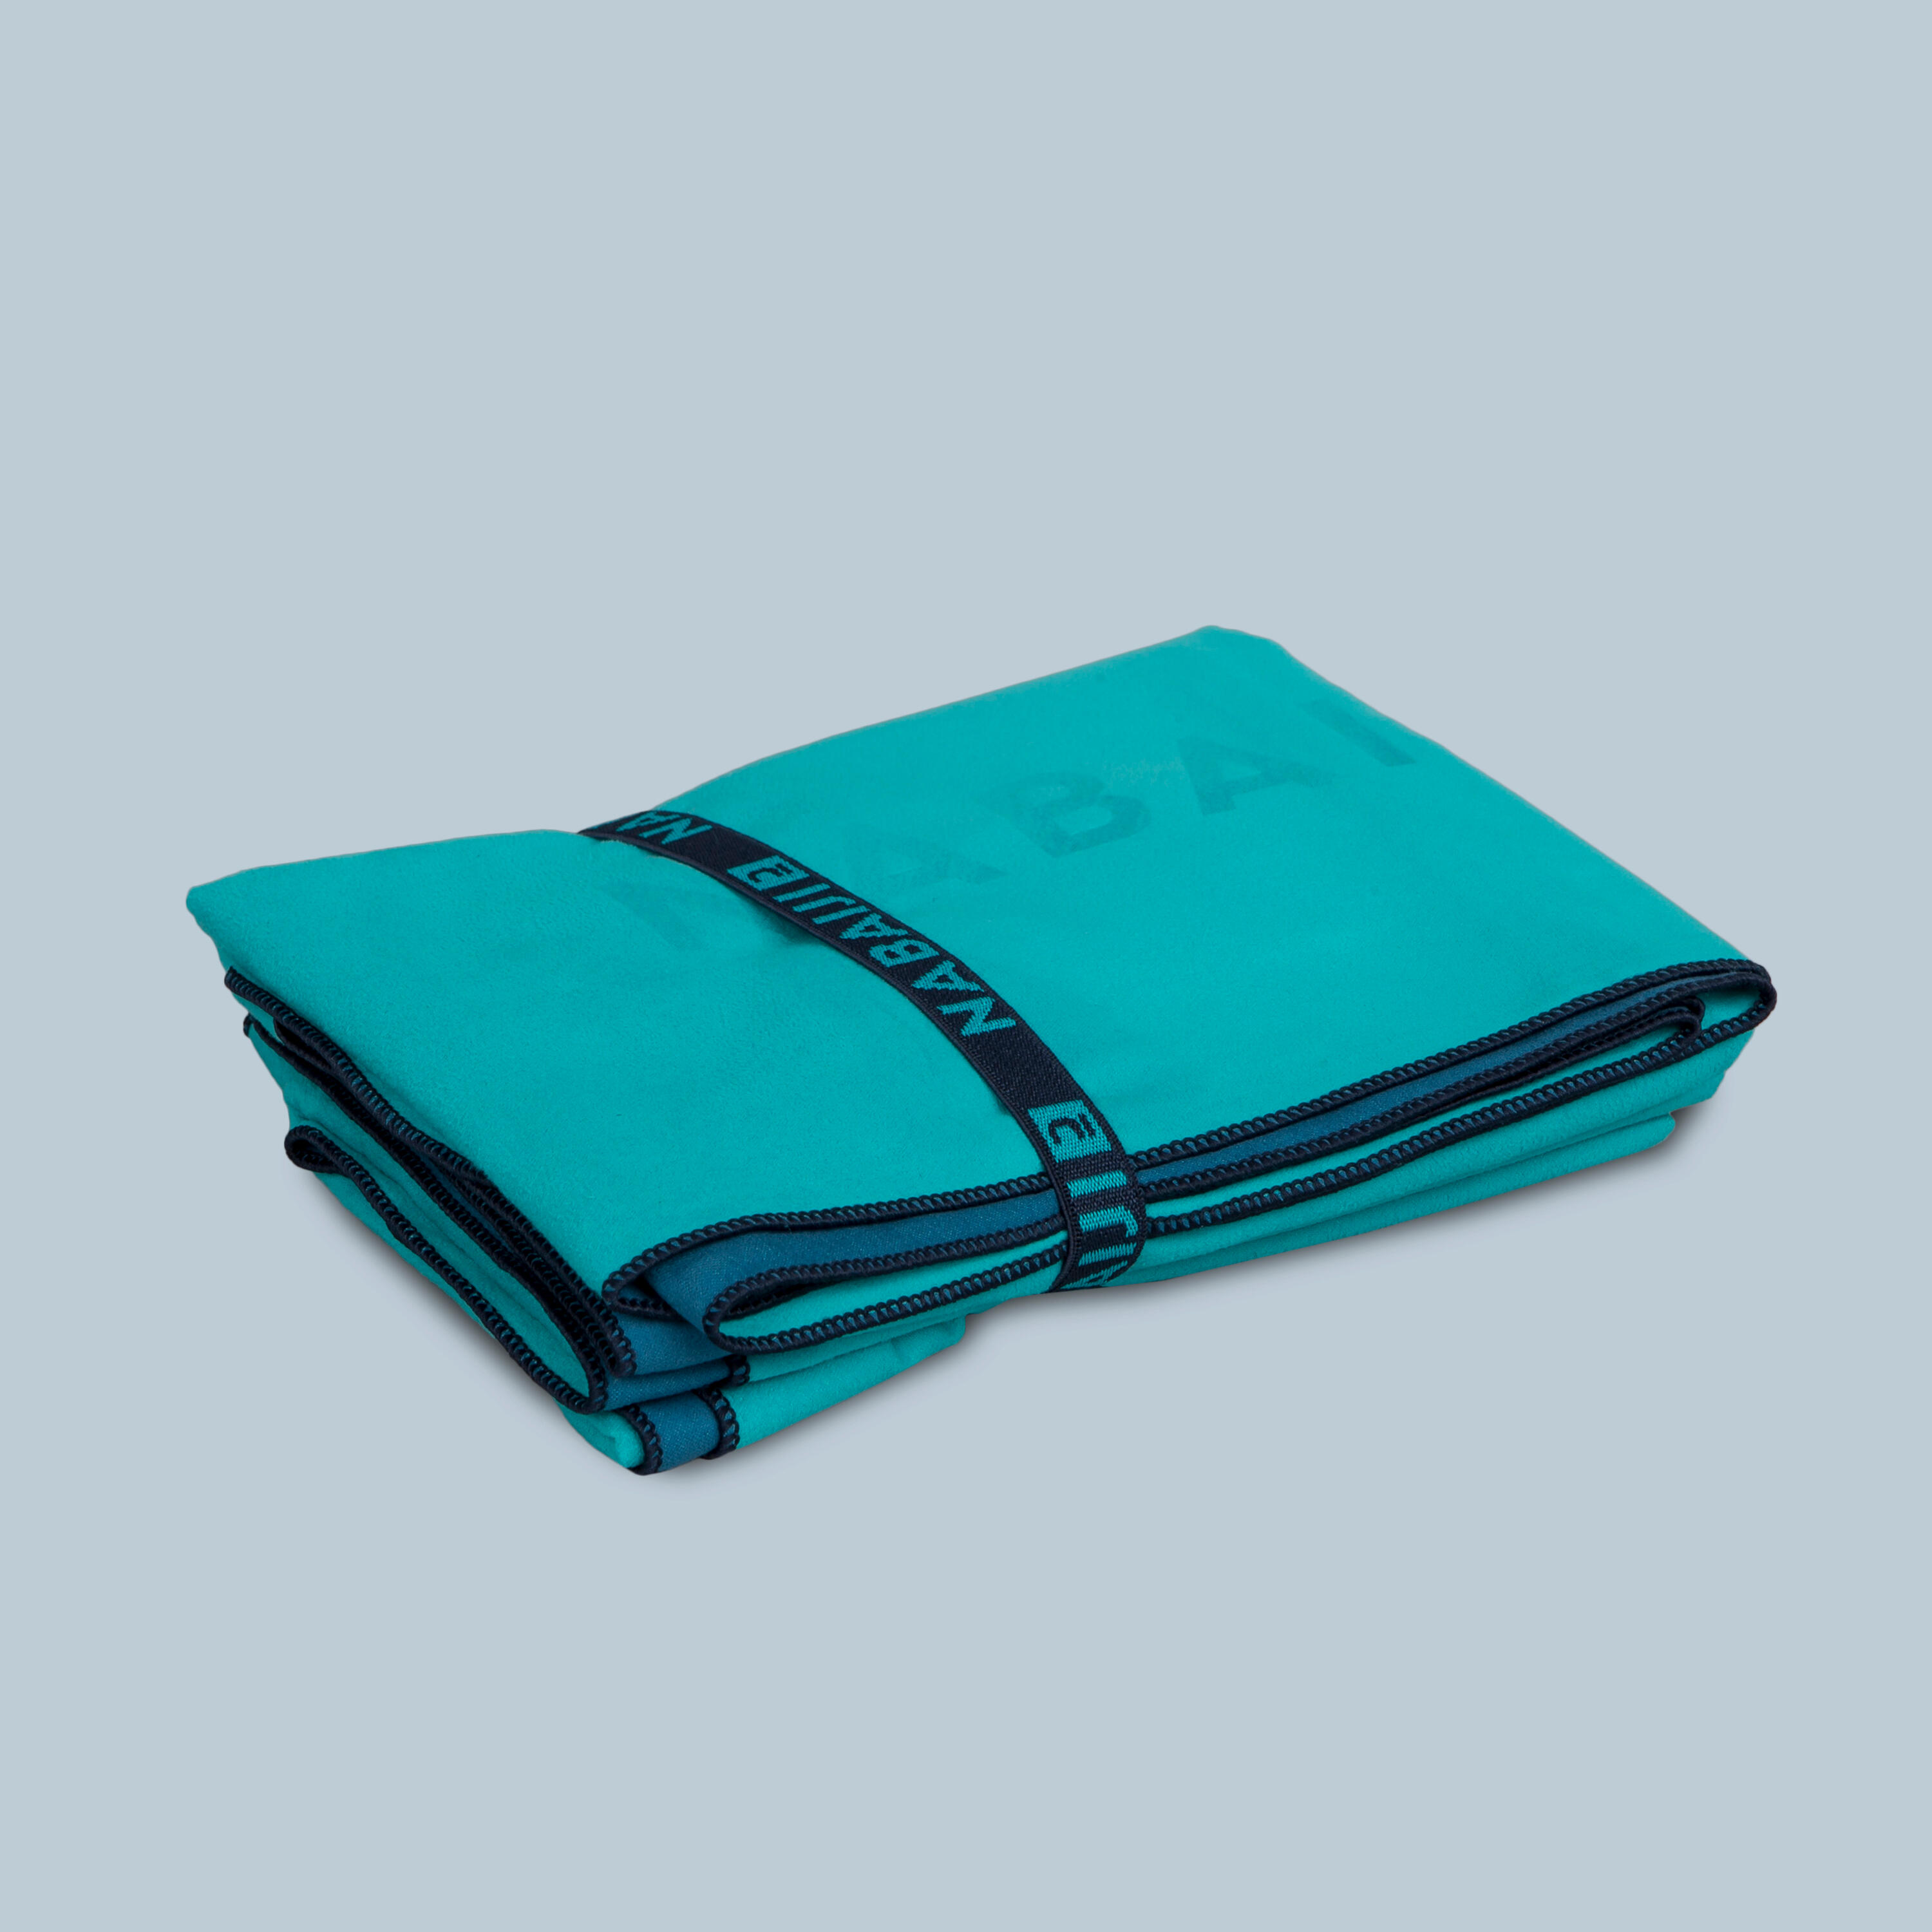 Microfibre Towel / Ultra Compact Double-Sided Size Xl 110 X 175 Cm - Blue/Green 2/4